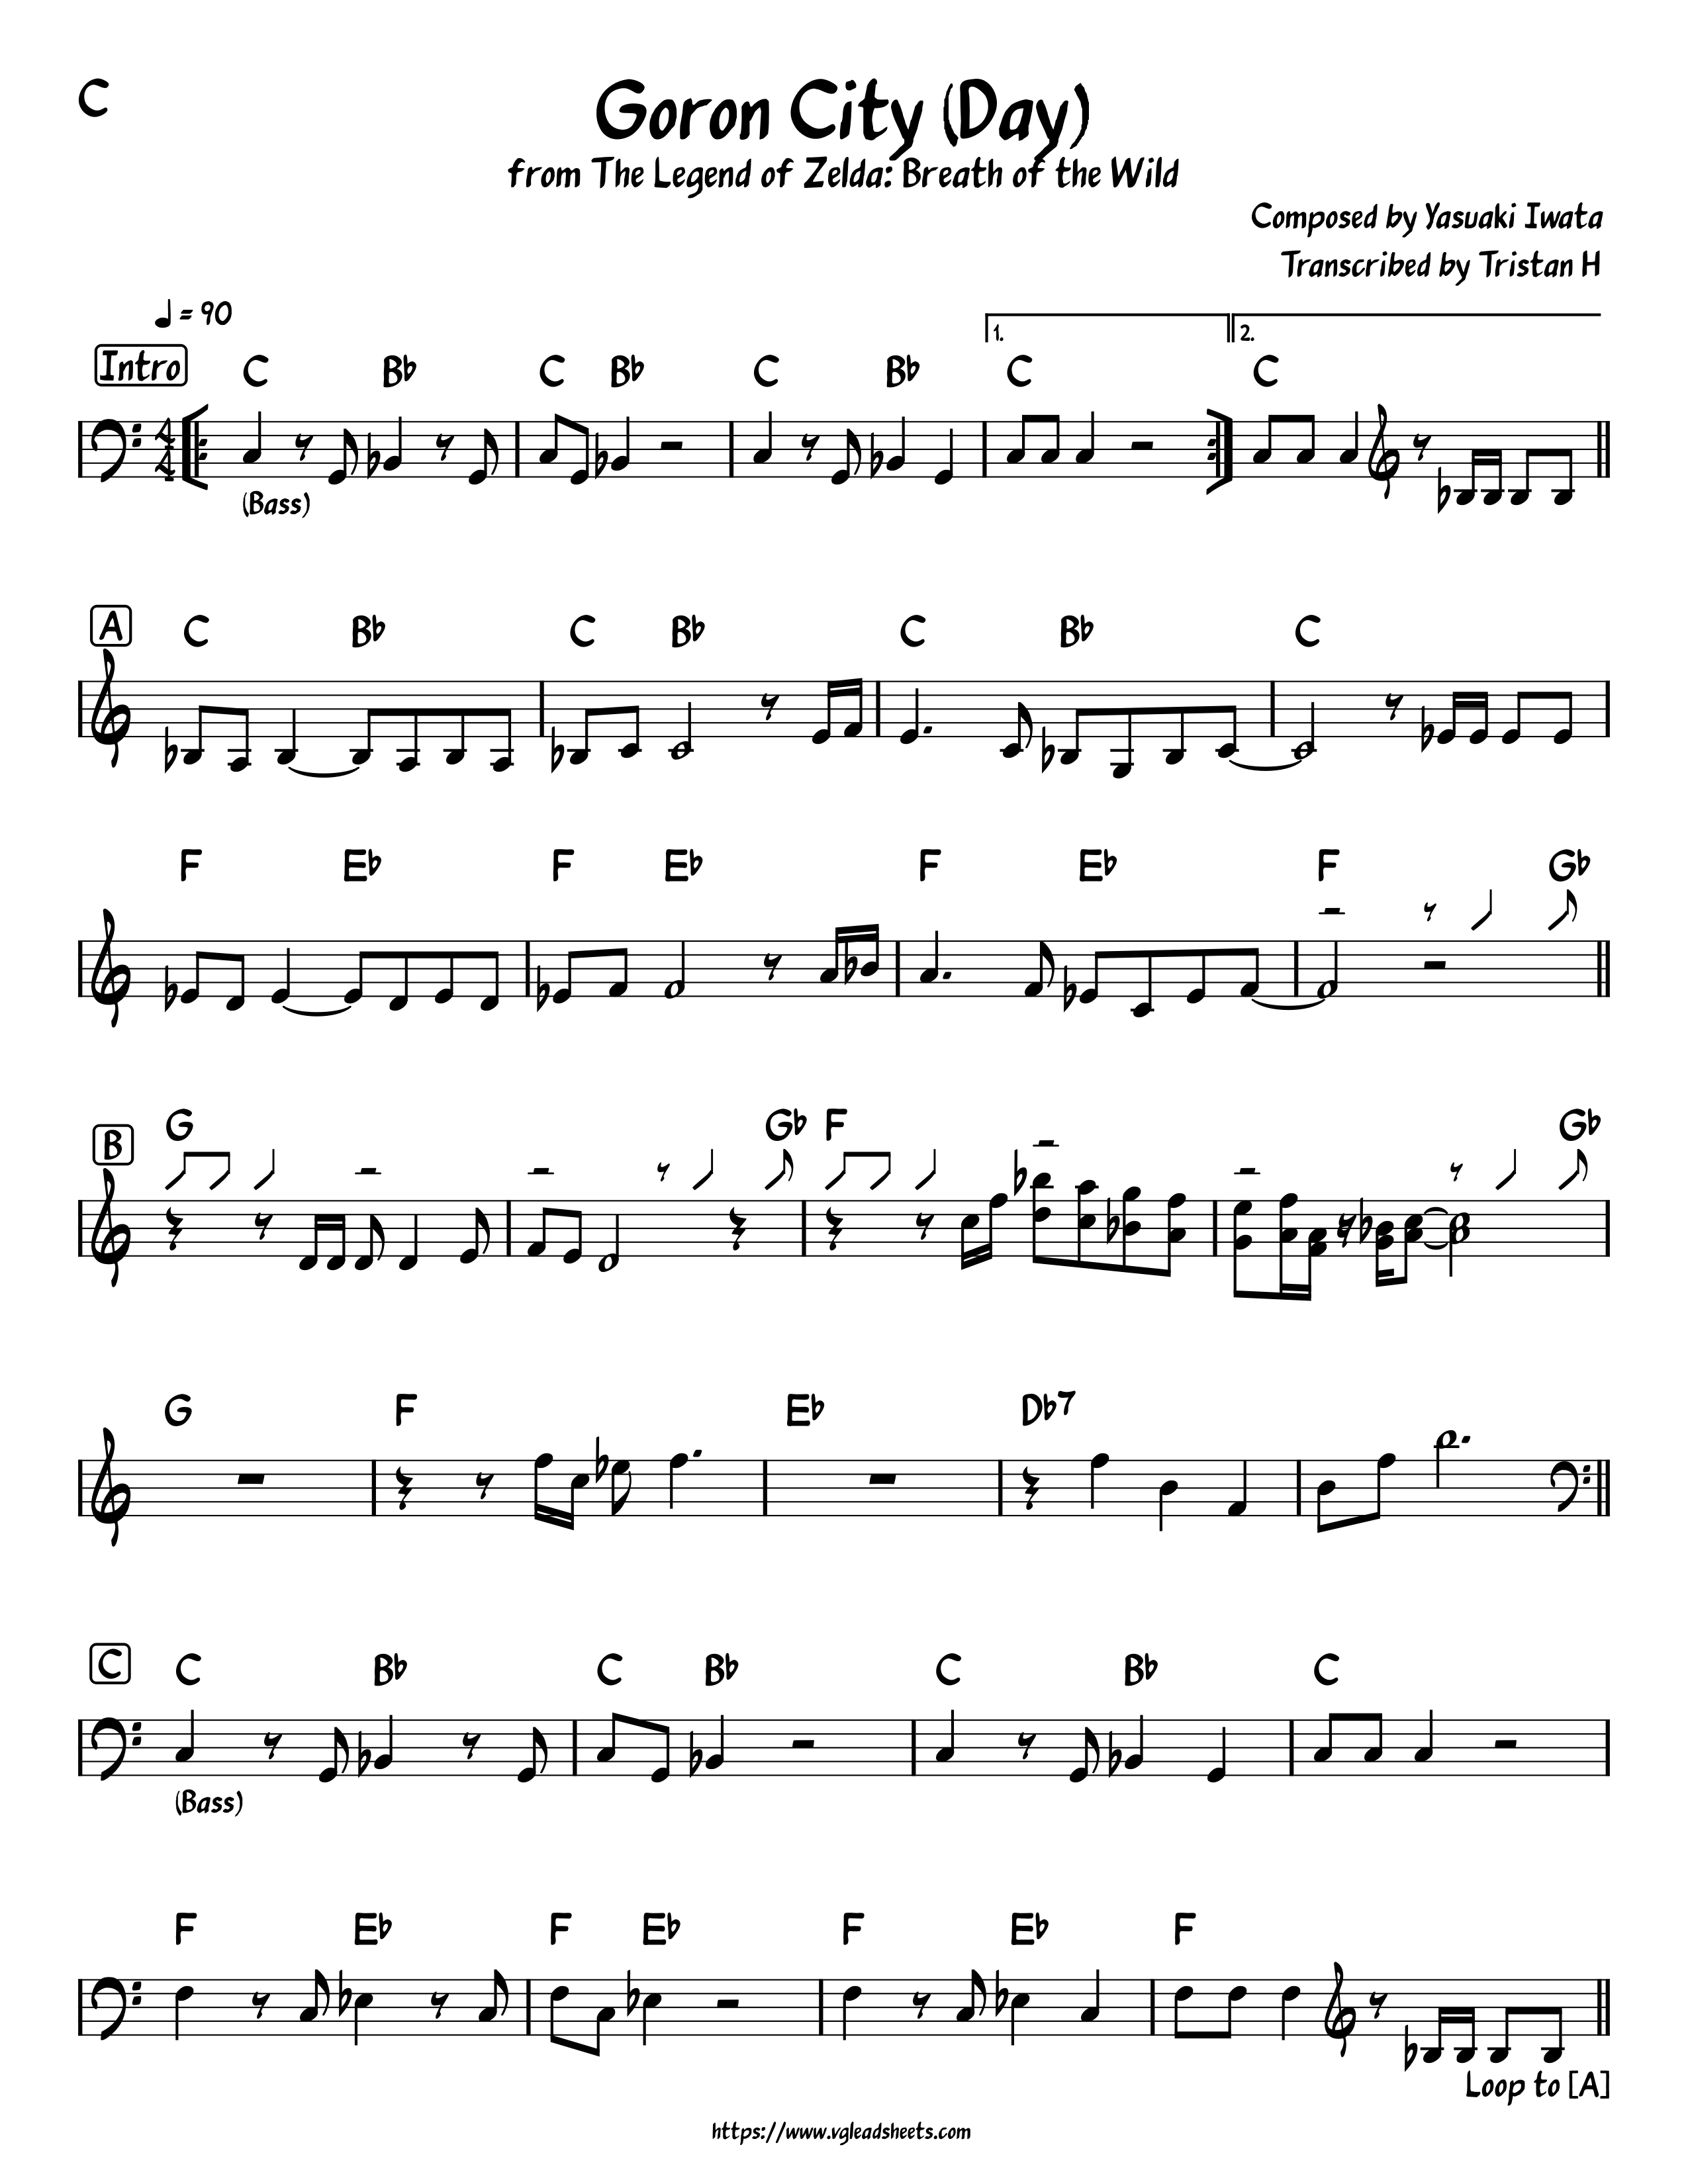 Rápido Son Correa The Legend of Zelda: Breath of the Wild - Goron City (Day) |  VGLeadSheets.com - Lead Sheets for Video Game Music